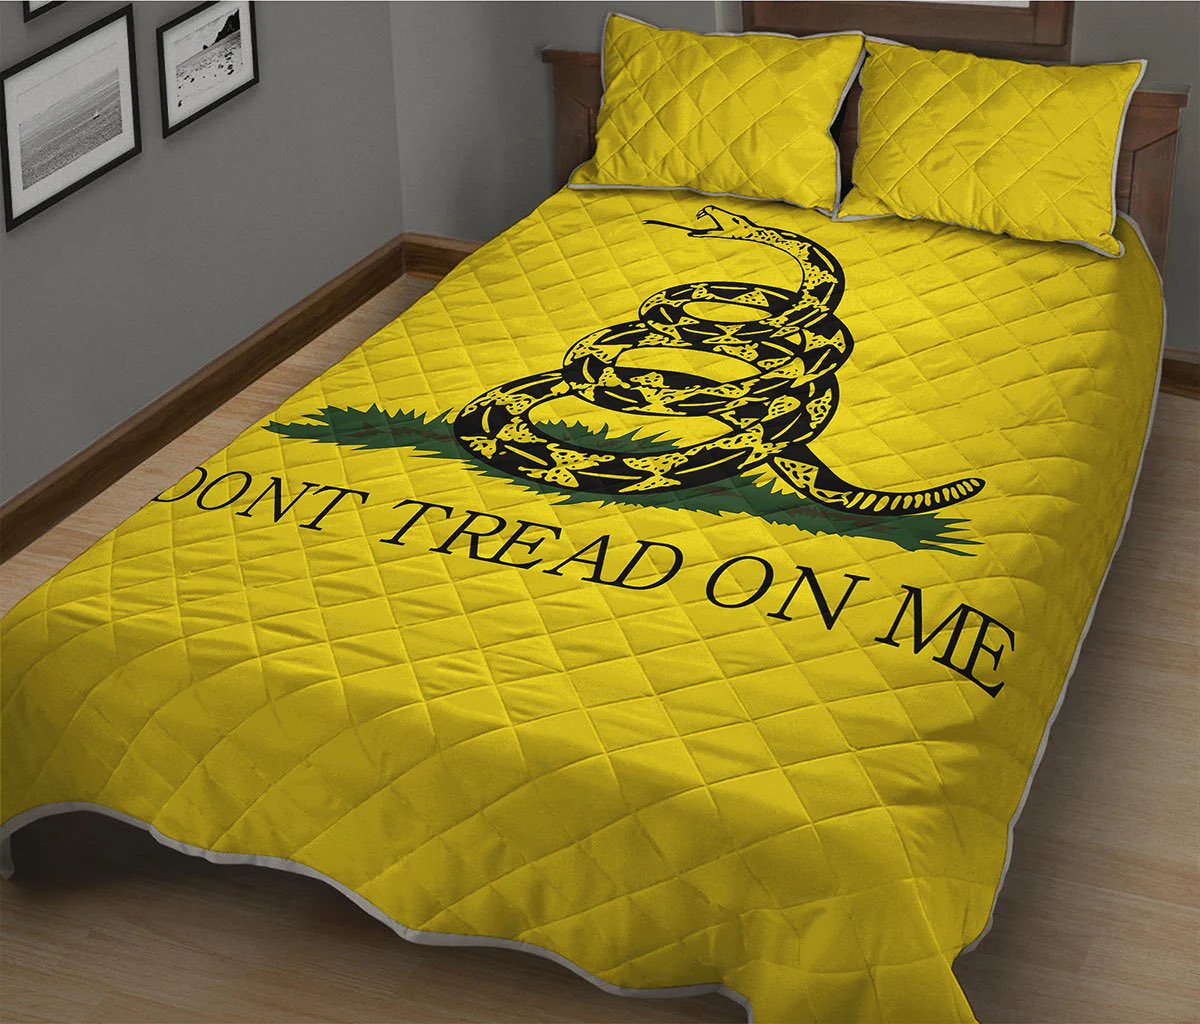 BREAKING: I have obtained a photo from an anonymous source of Justice Samuel Alito's guest bedroom.